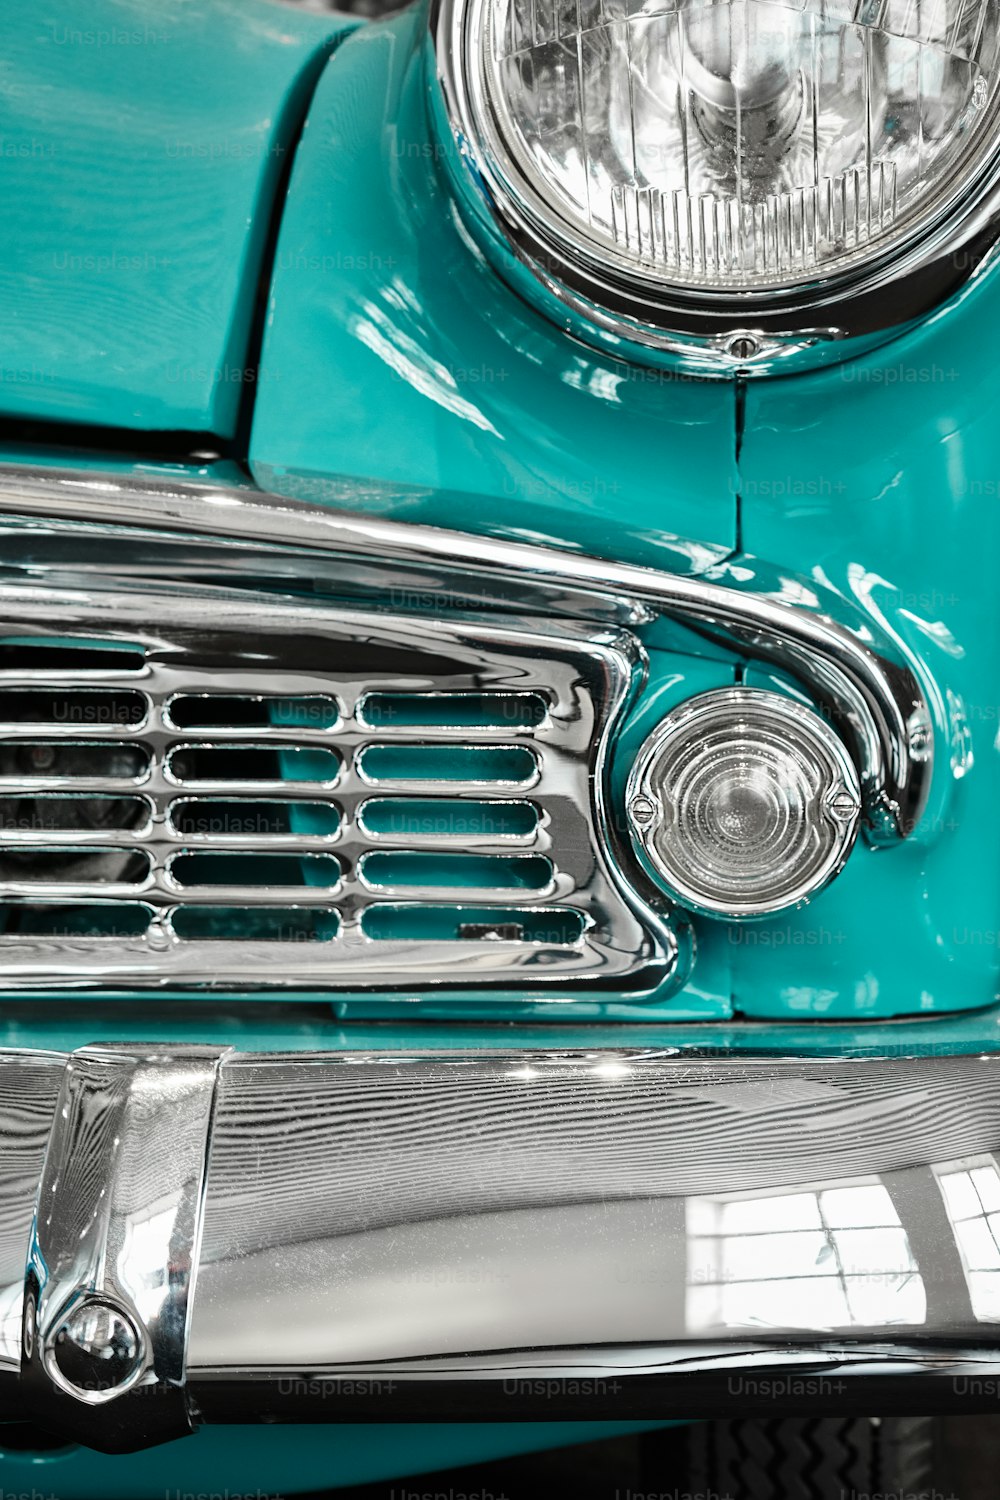 a close up of the front end of a classic car